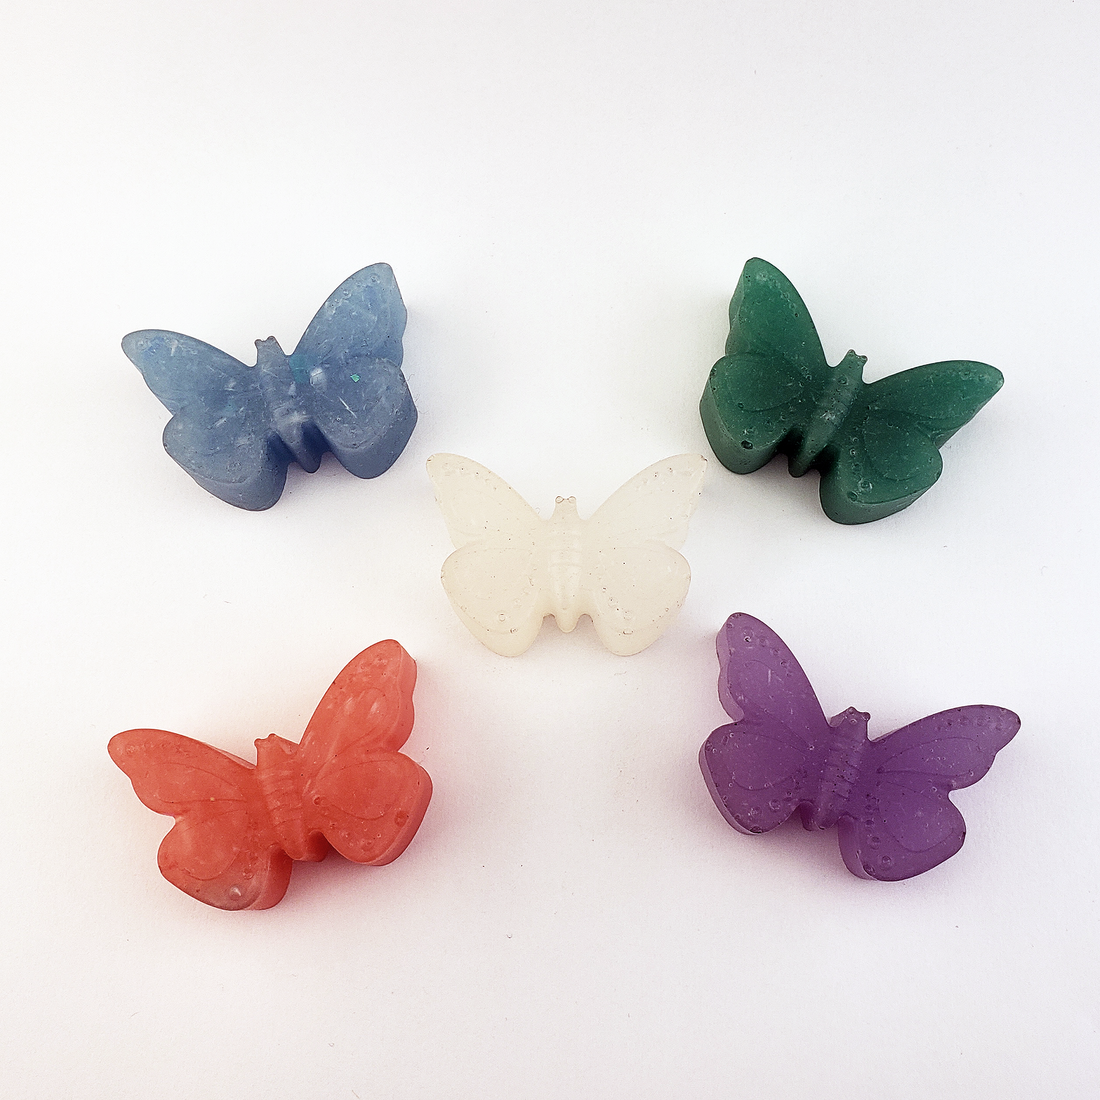  Rainbow Resin Butterfly Totem Figurine - Handmade Valentine's Day Gift - On White Background